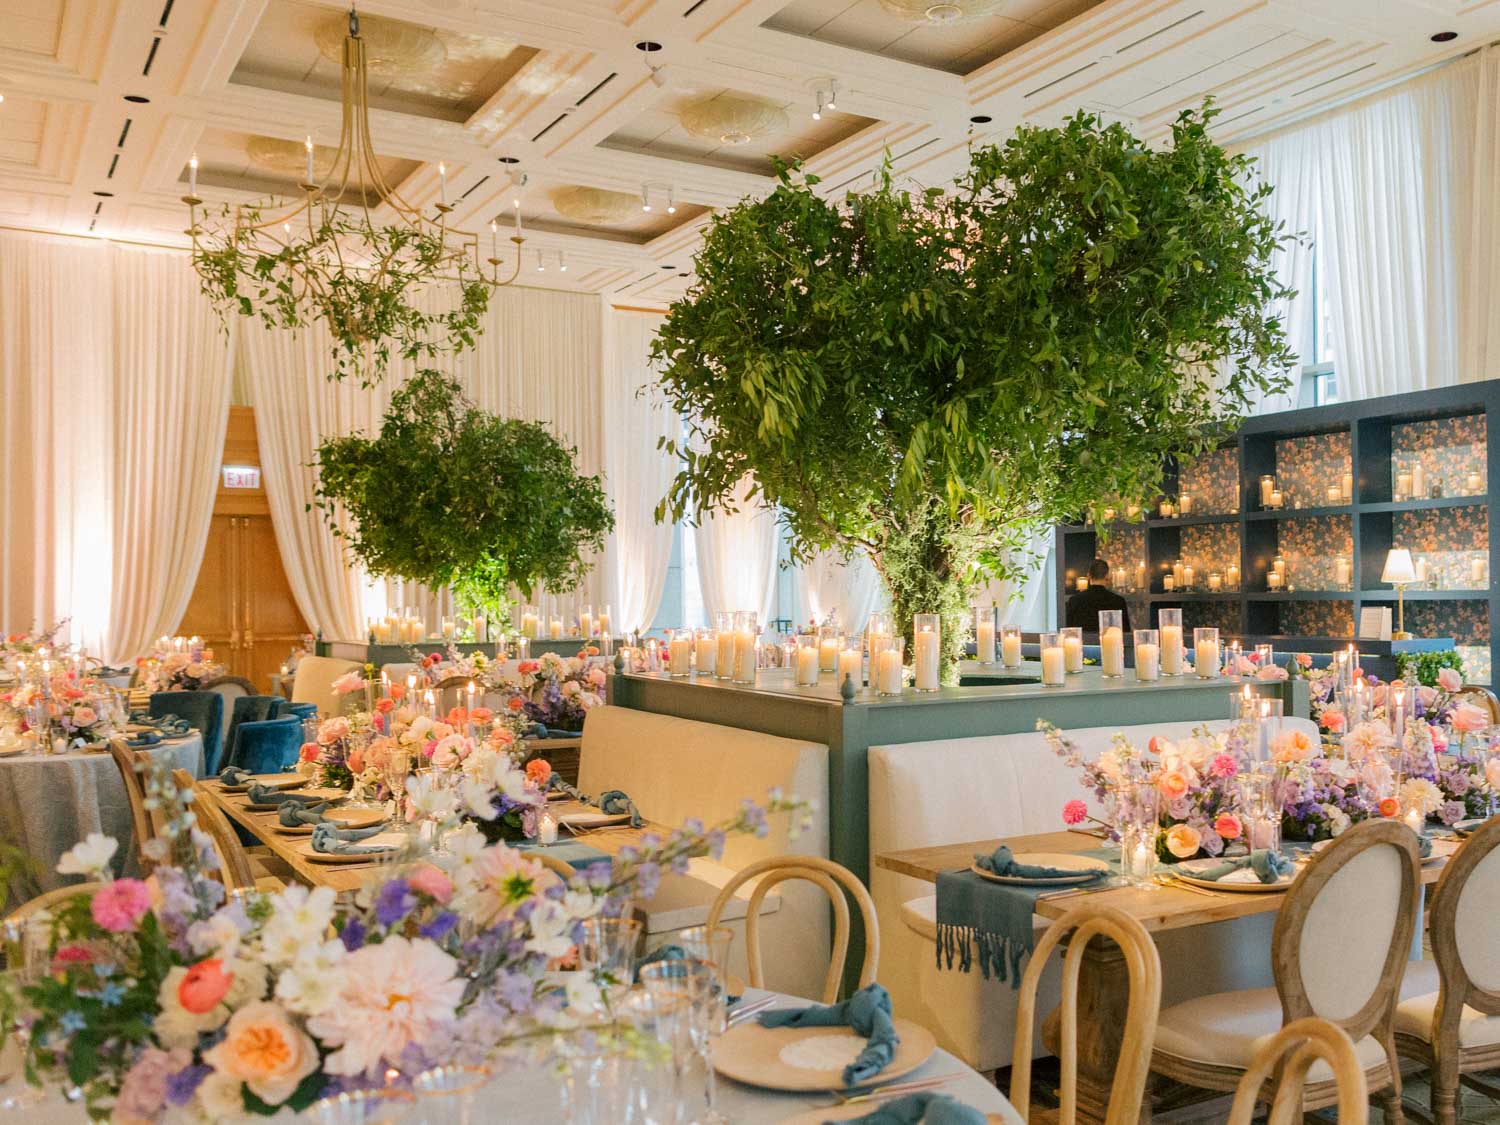 A gorgeous wedding reception captured at The Peninsula in Chicago.